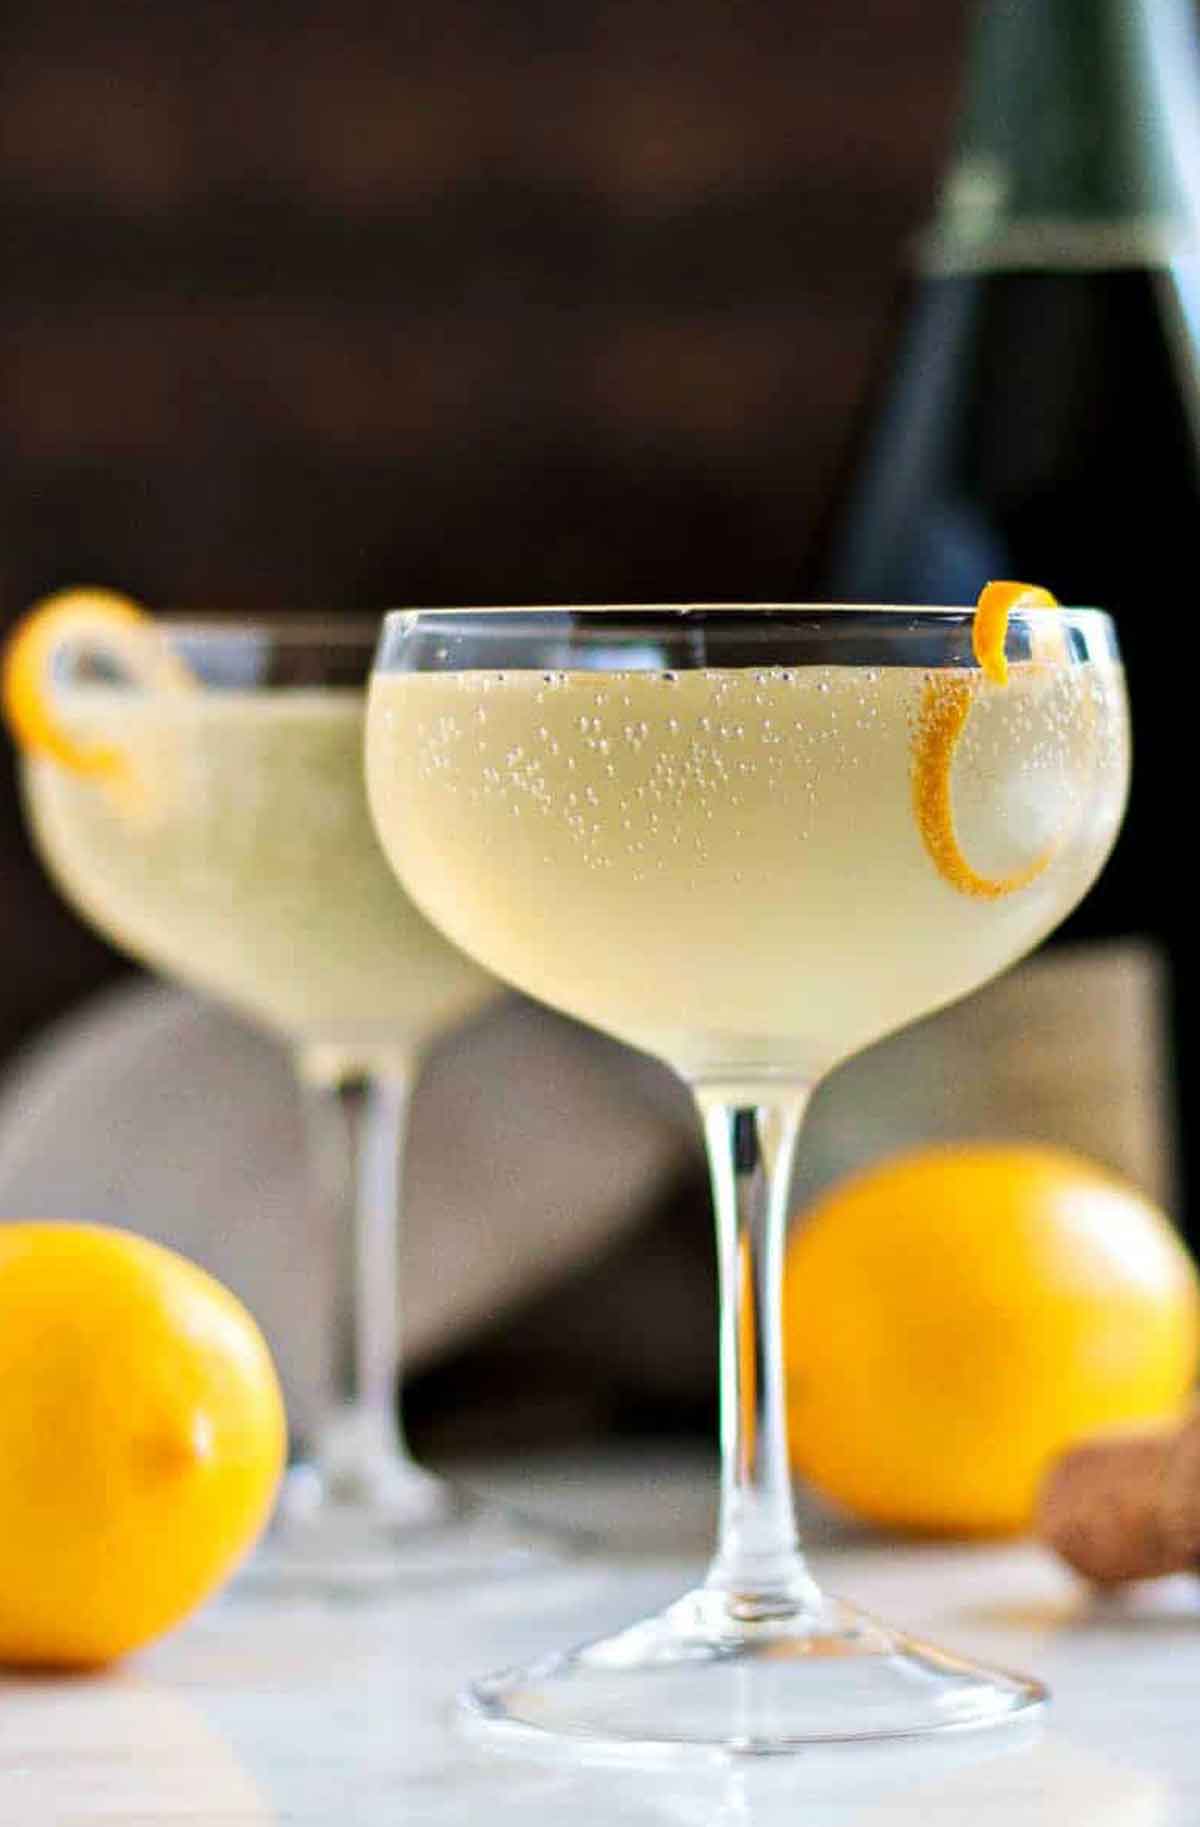 2 French 75 cocktails garnished with lemon on a table beside 2 lemons and a bottle in the background.